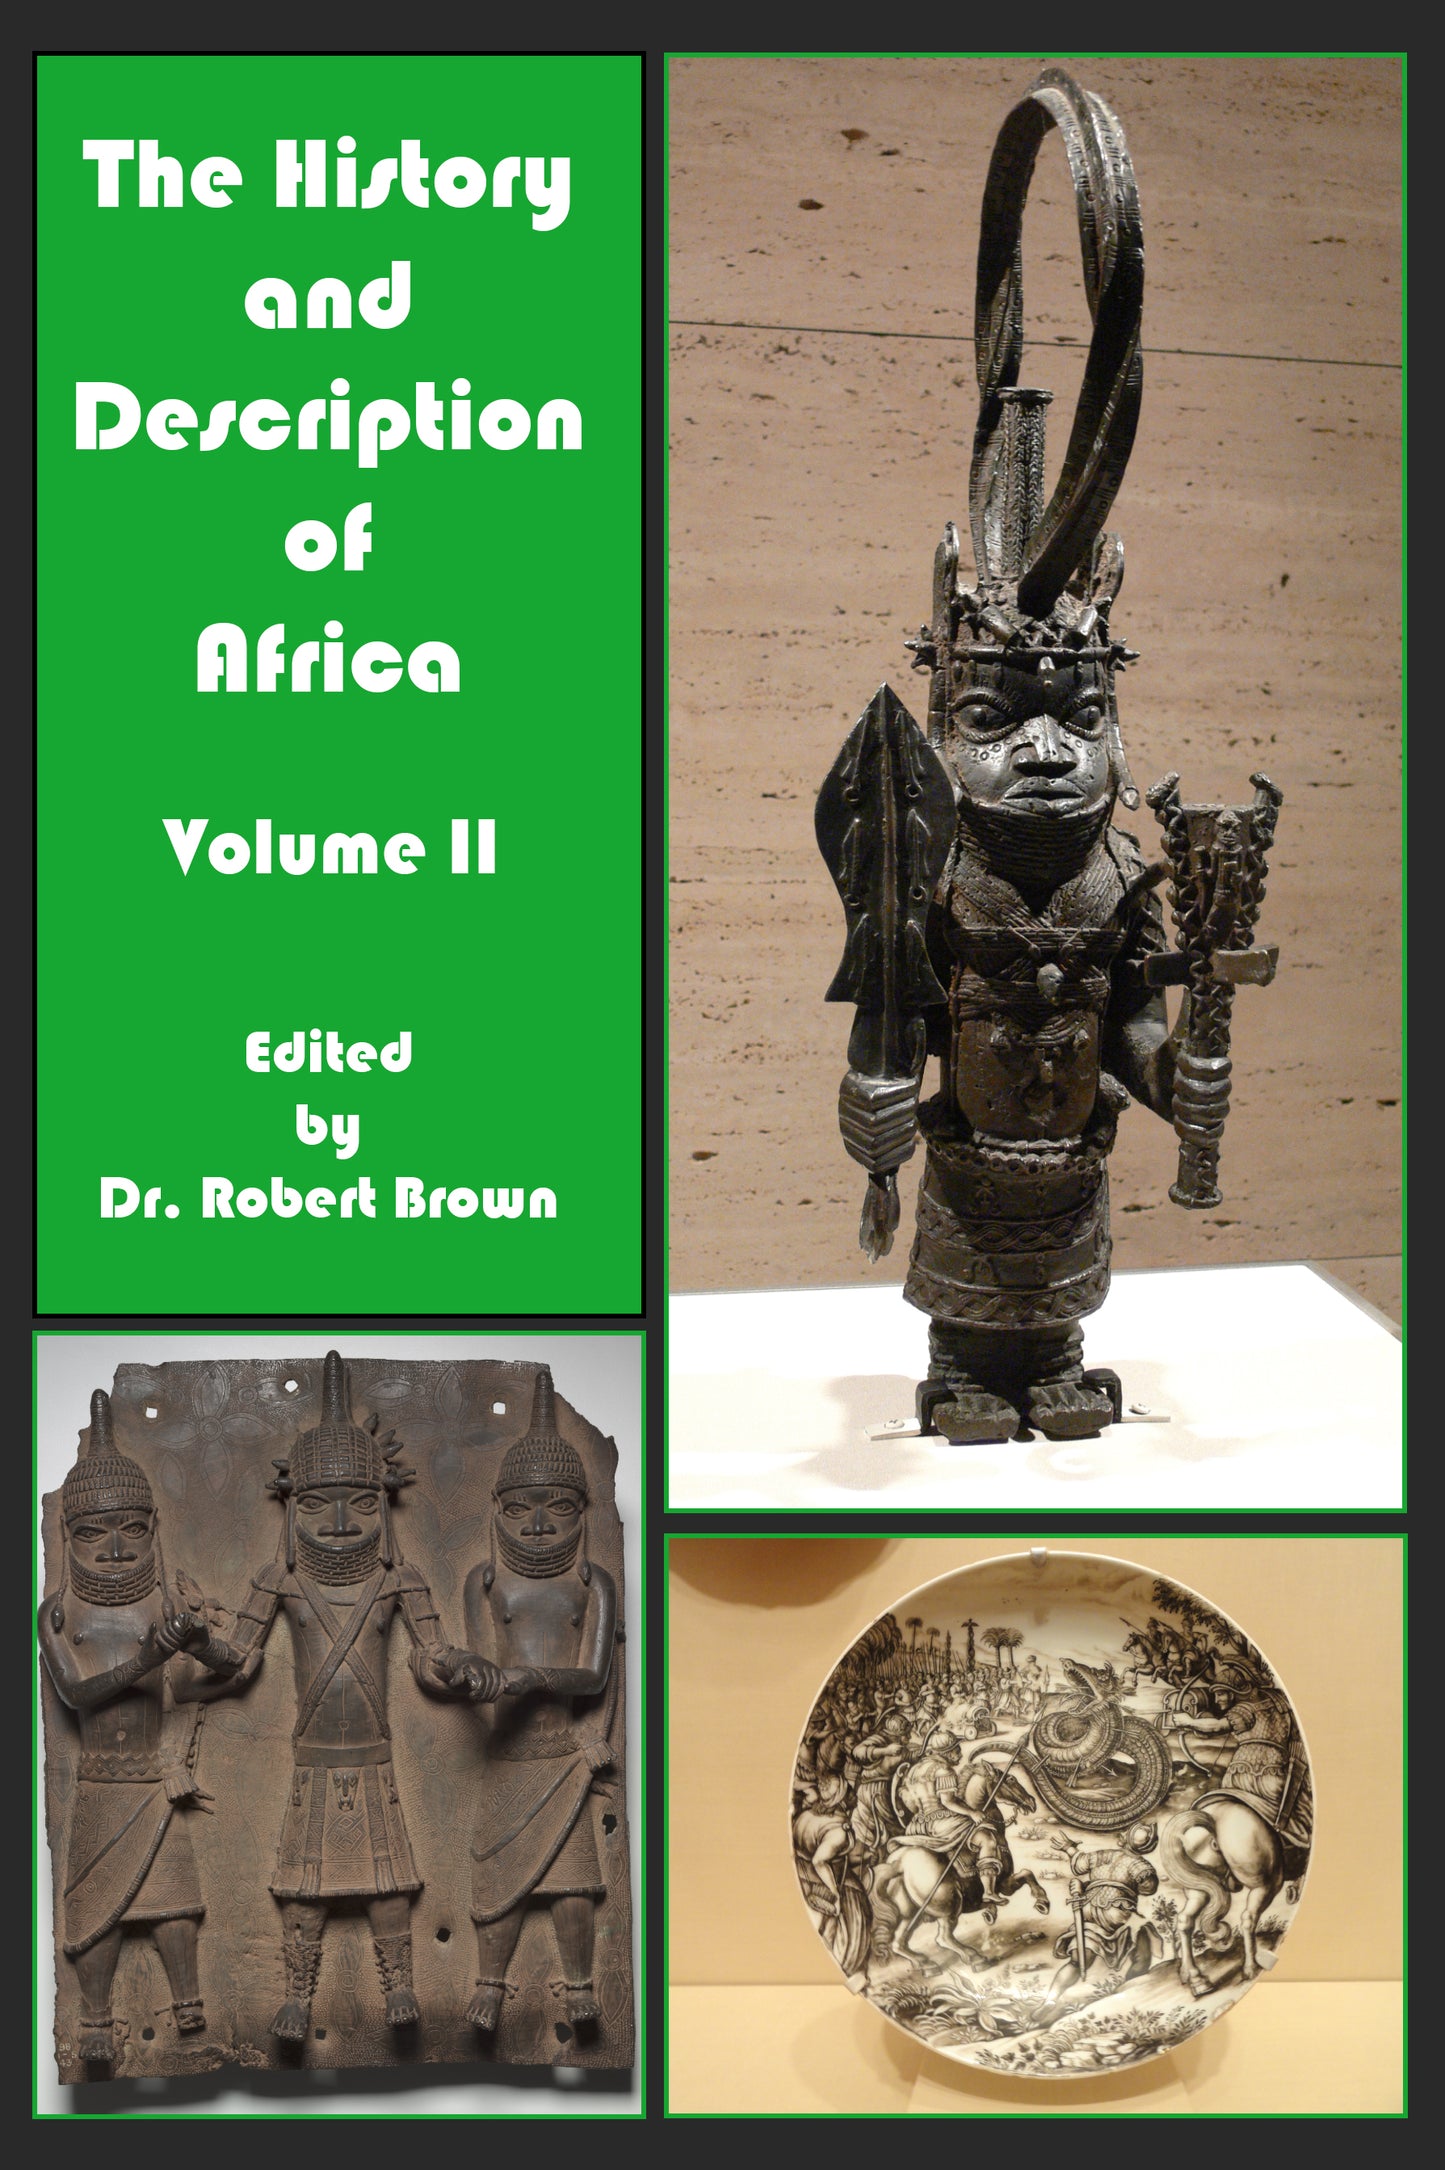 The History and Description of Africa Volume II